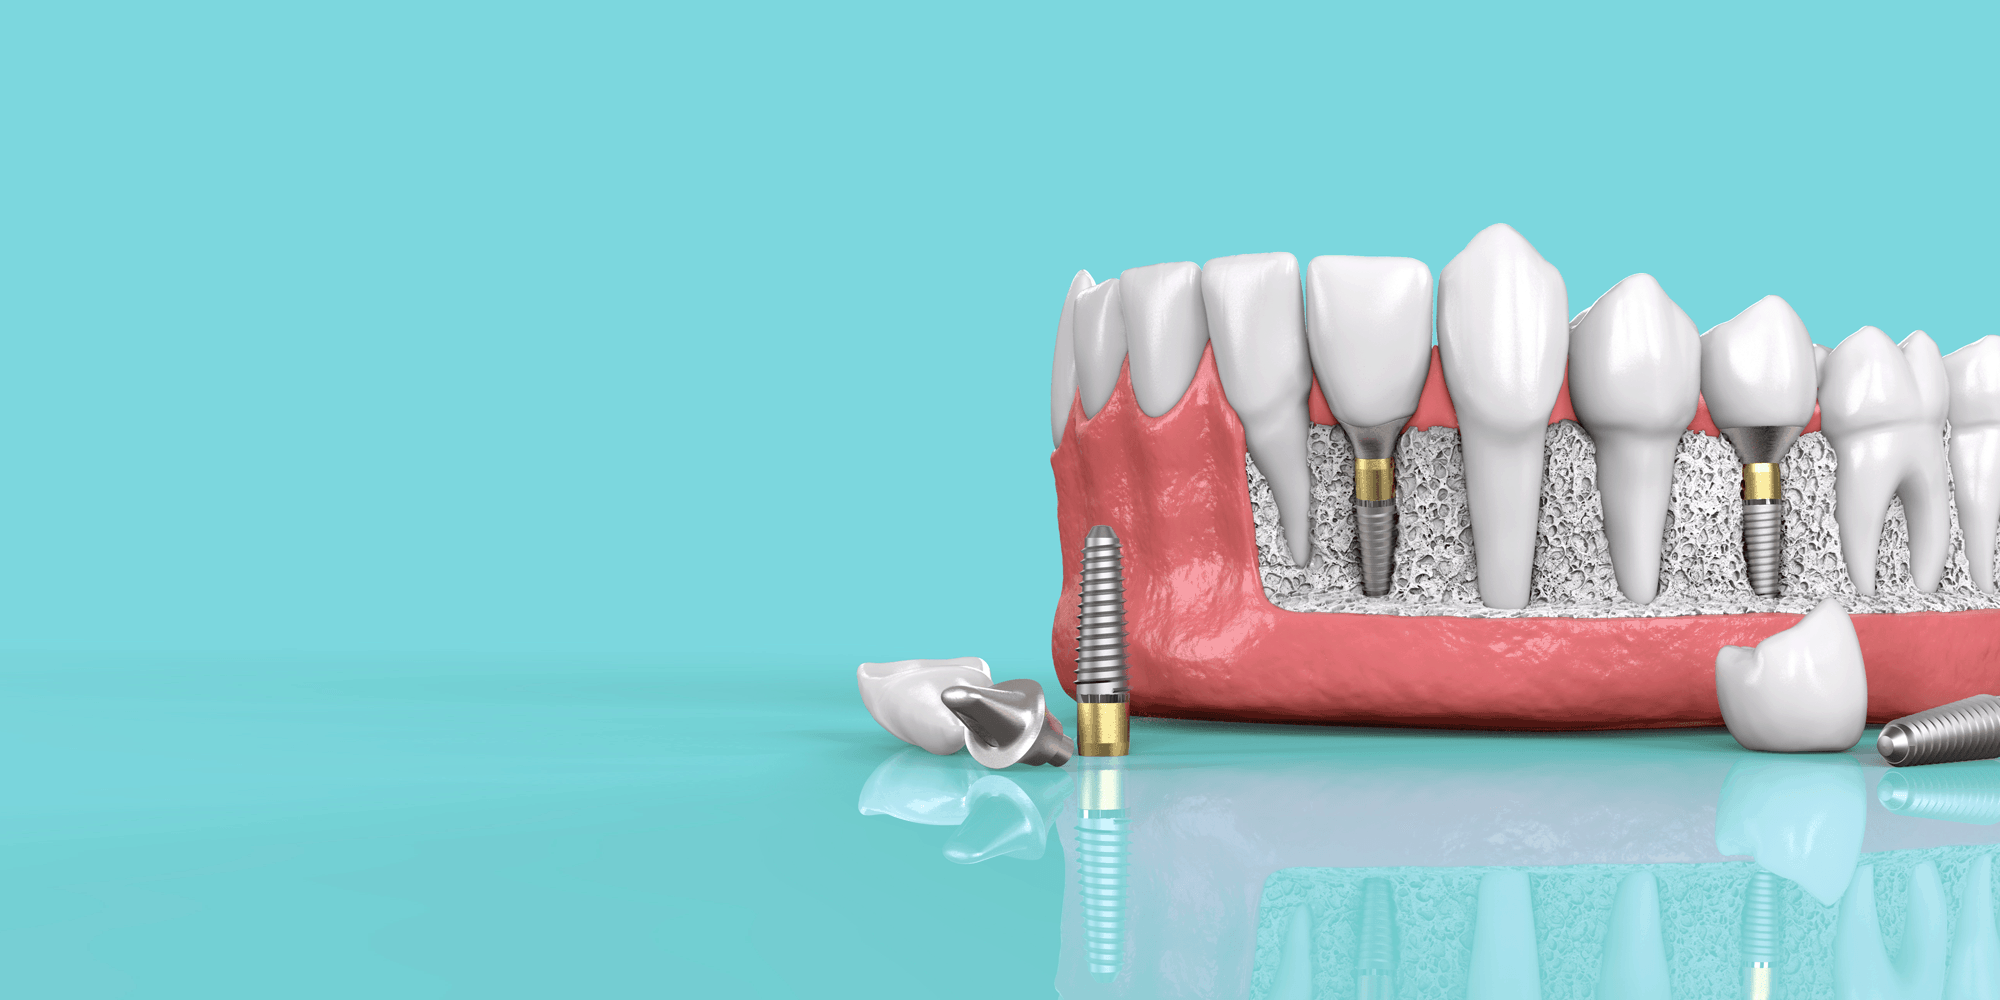 Top 3 Reasons Dental Implants are Increasingly Becoming Popular